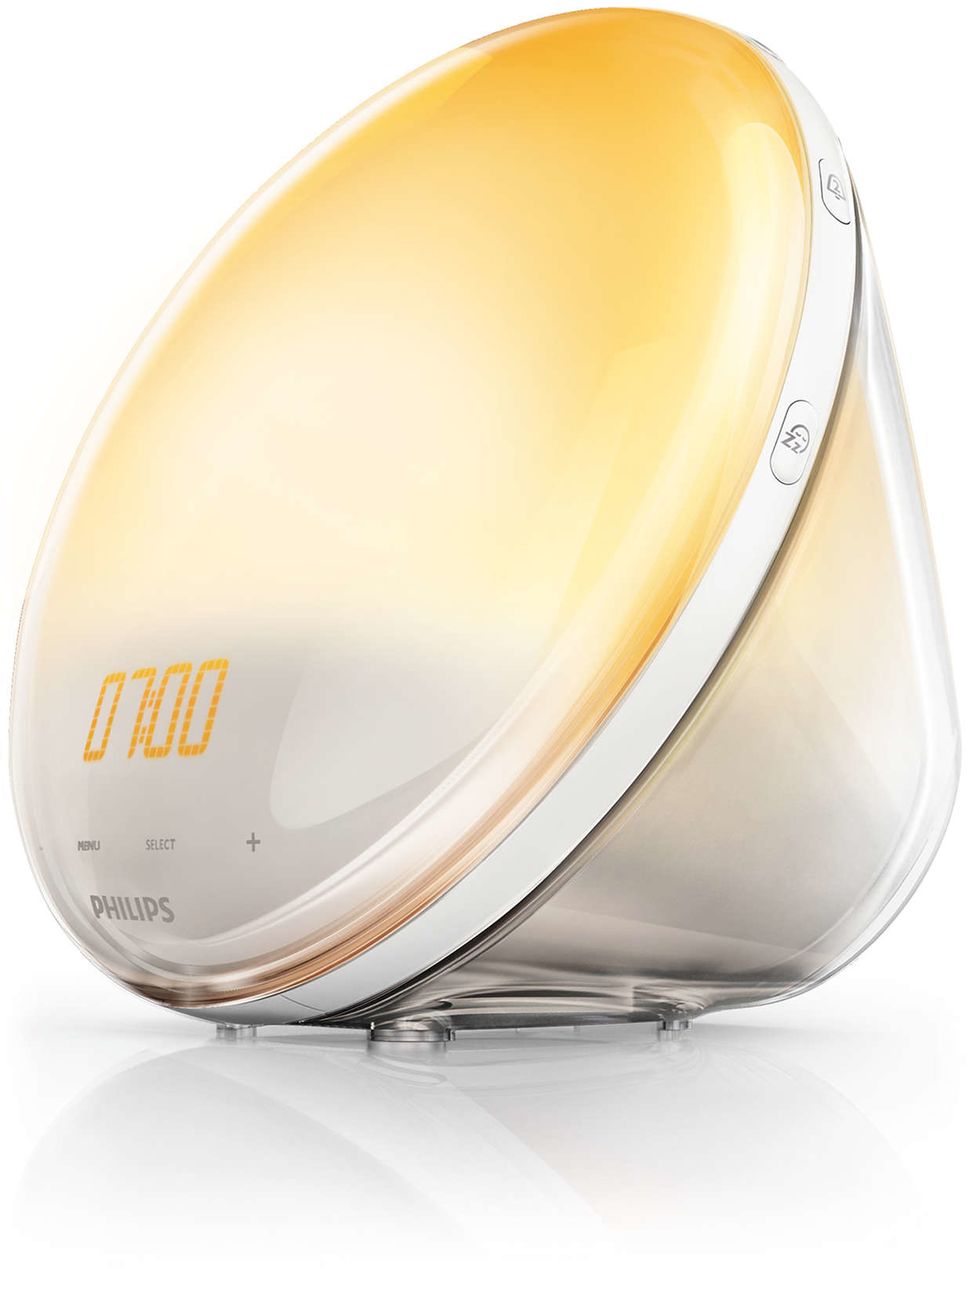 A lamp in yellow and white from Philips showing the time as 7 am